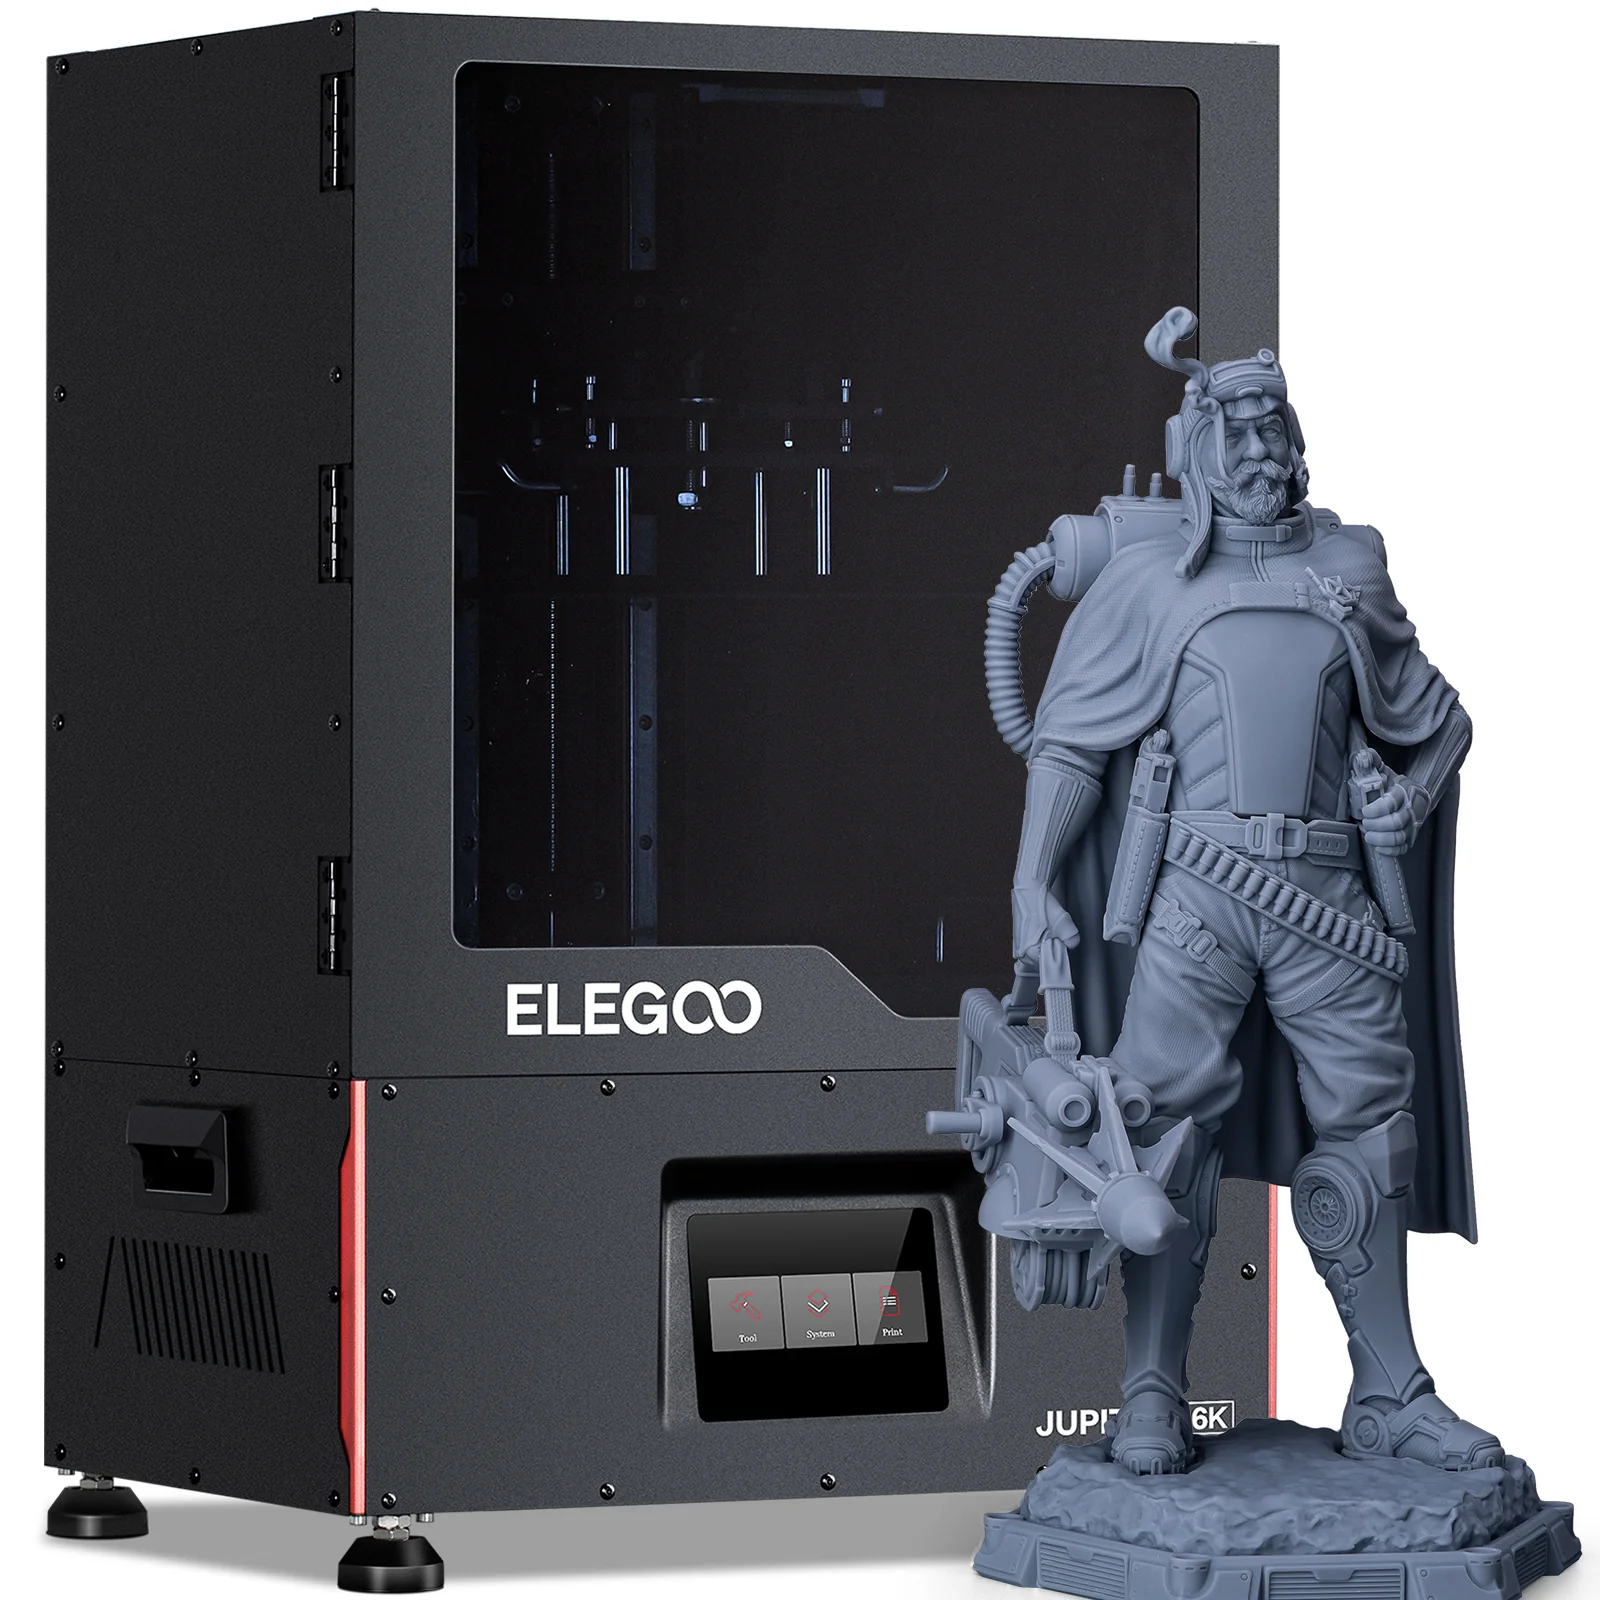 The Elegoo Jupiter 3D printer is about to make some giant waves